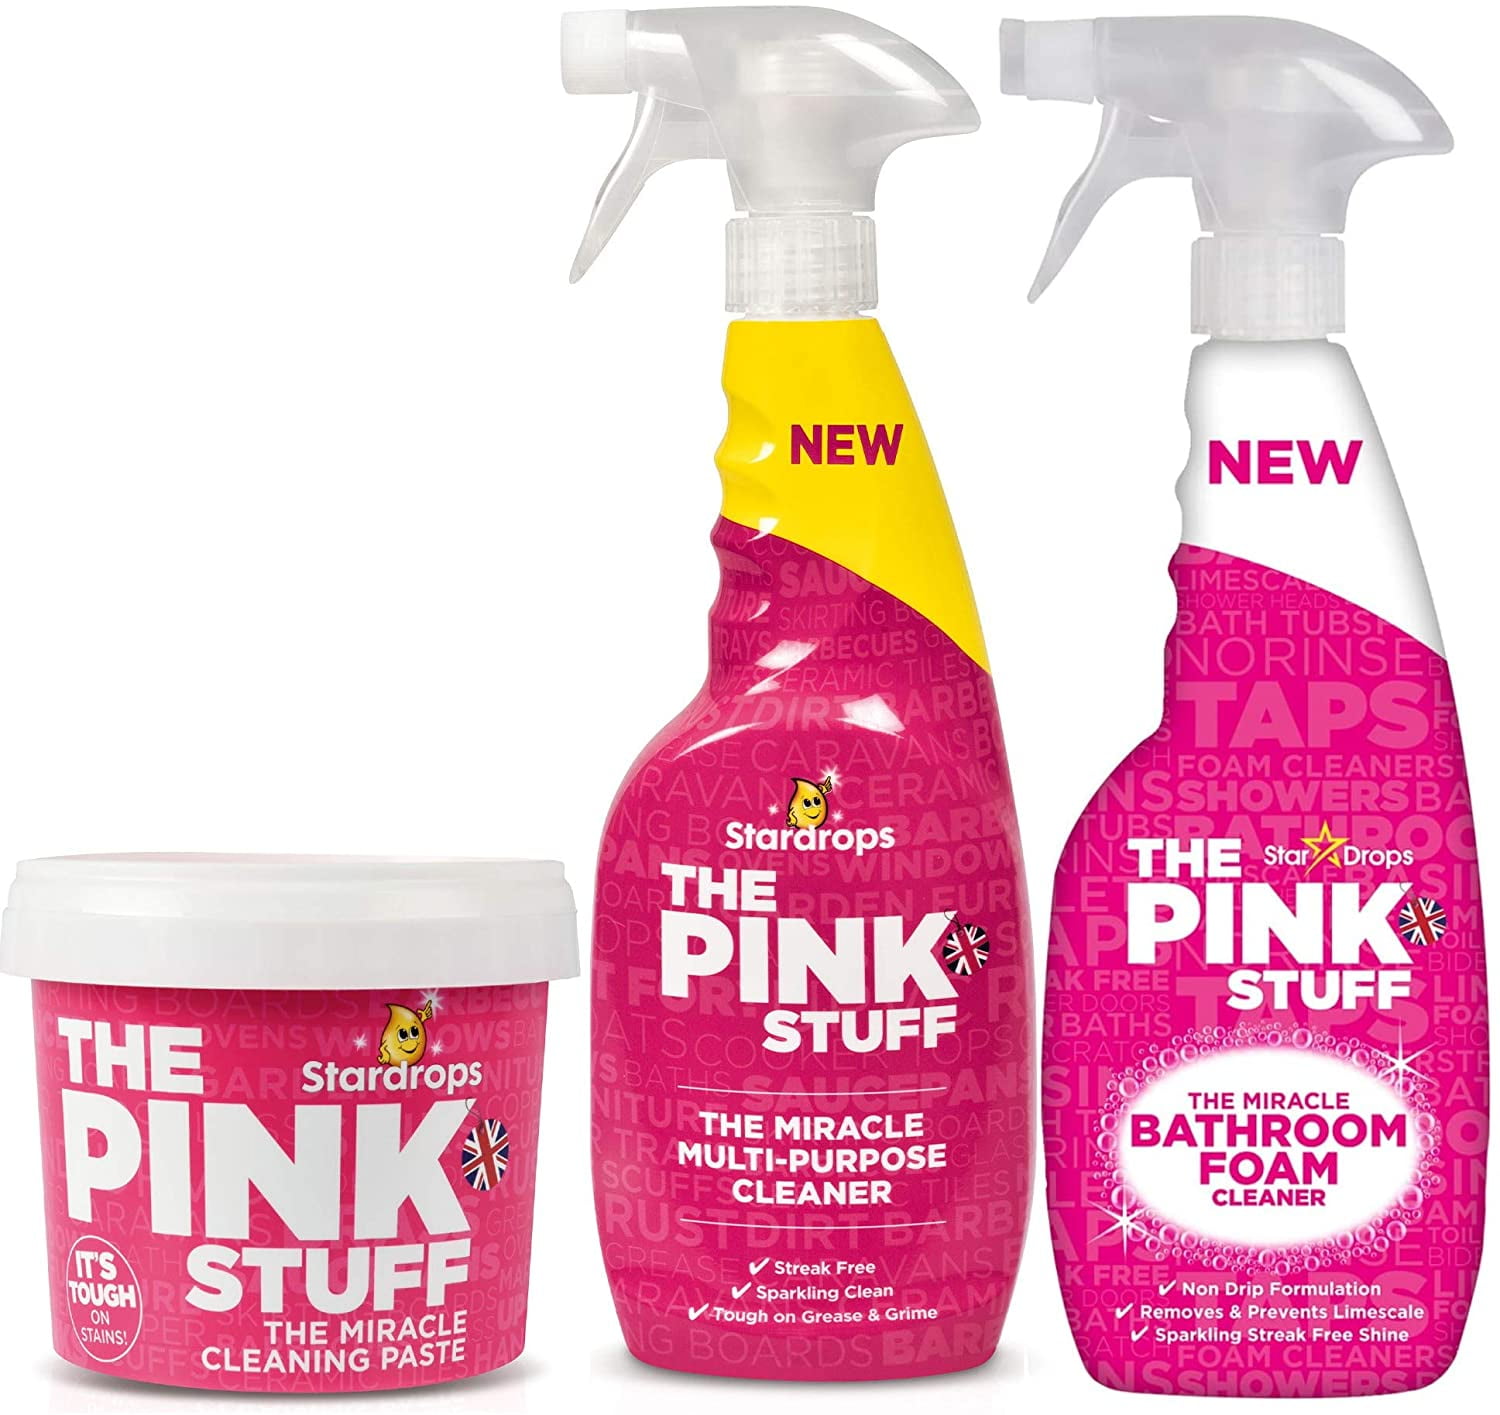 Stardrops - The Pink Stuff - The Miracle Cleaning Paste, Multi-Purpose  Spray, And Bathroom Foam 3-Pack Bundle